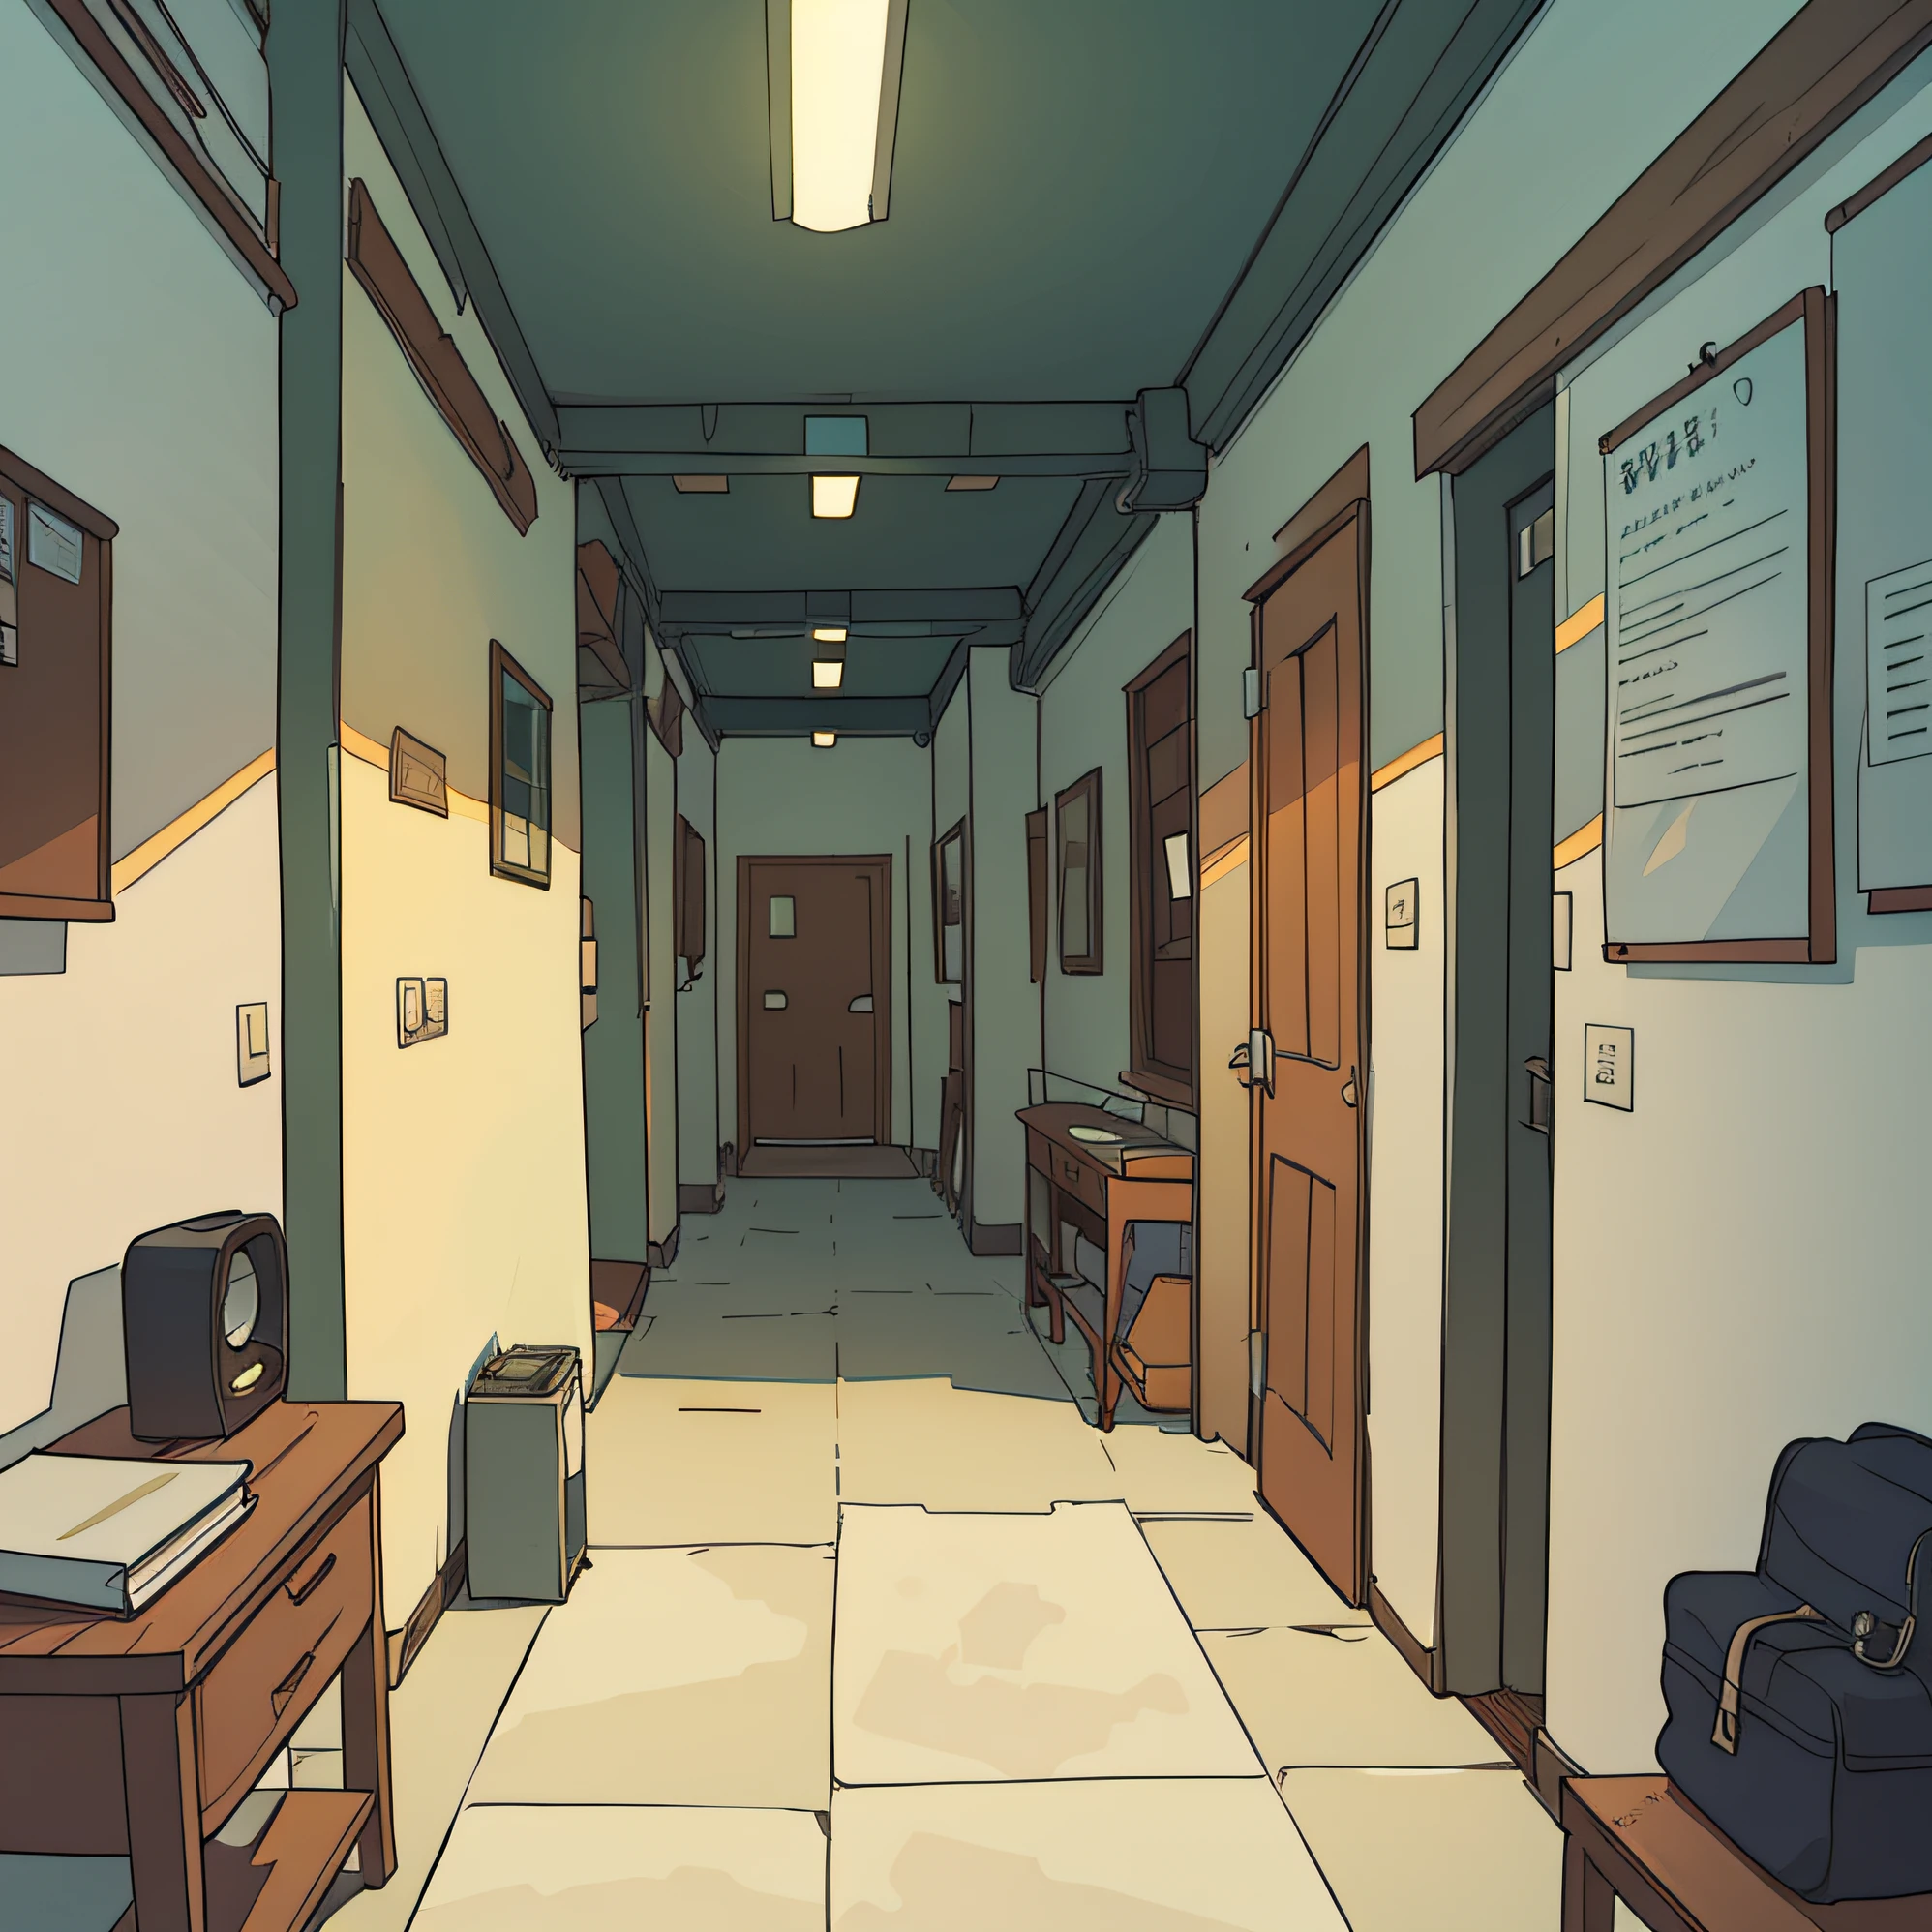 2d side view camera of hallway school, high detailed, anime style, indonesian school, game assets